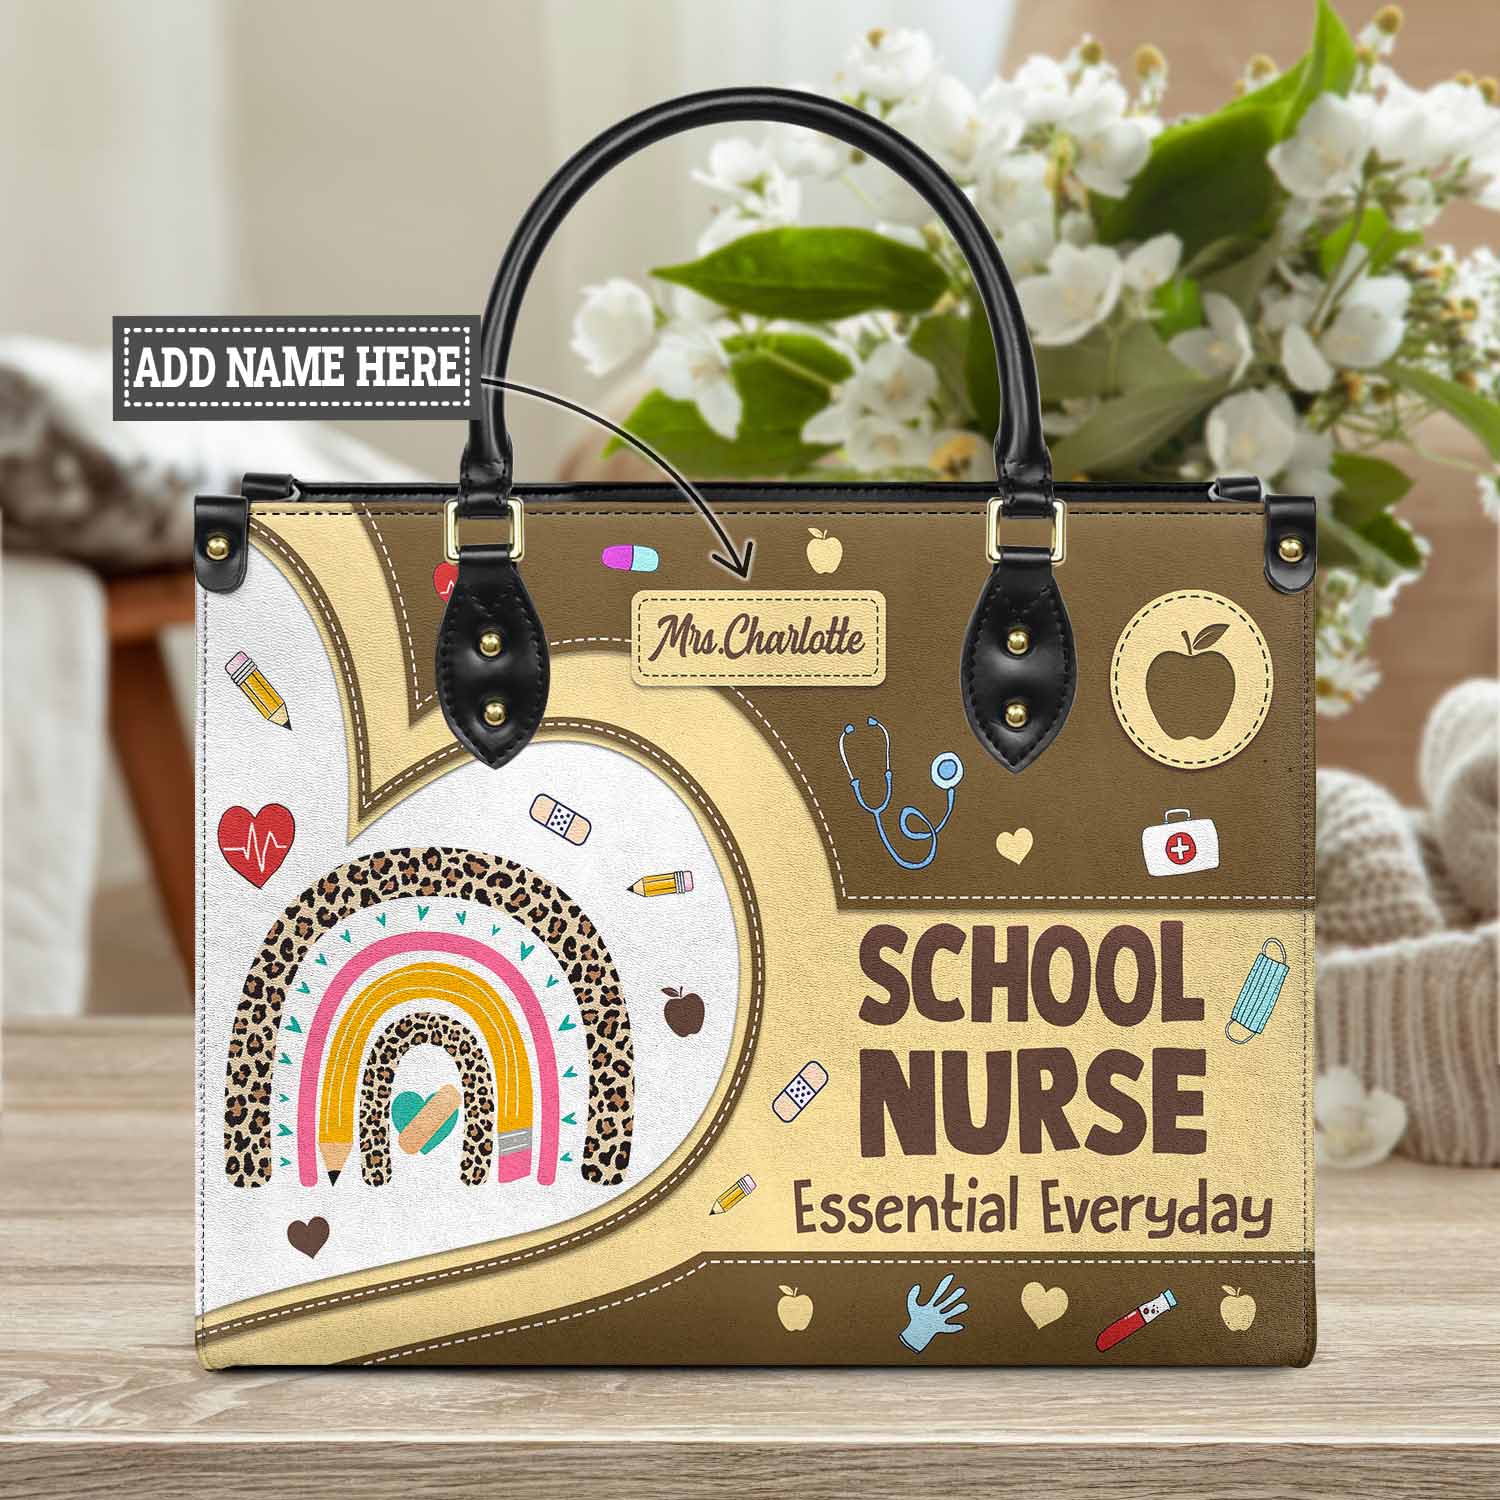 Retired Nurse Personalized Leather Bag